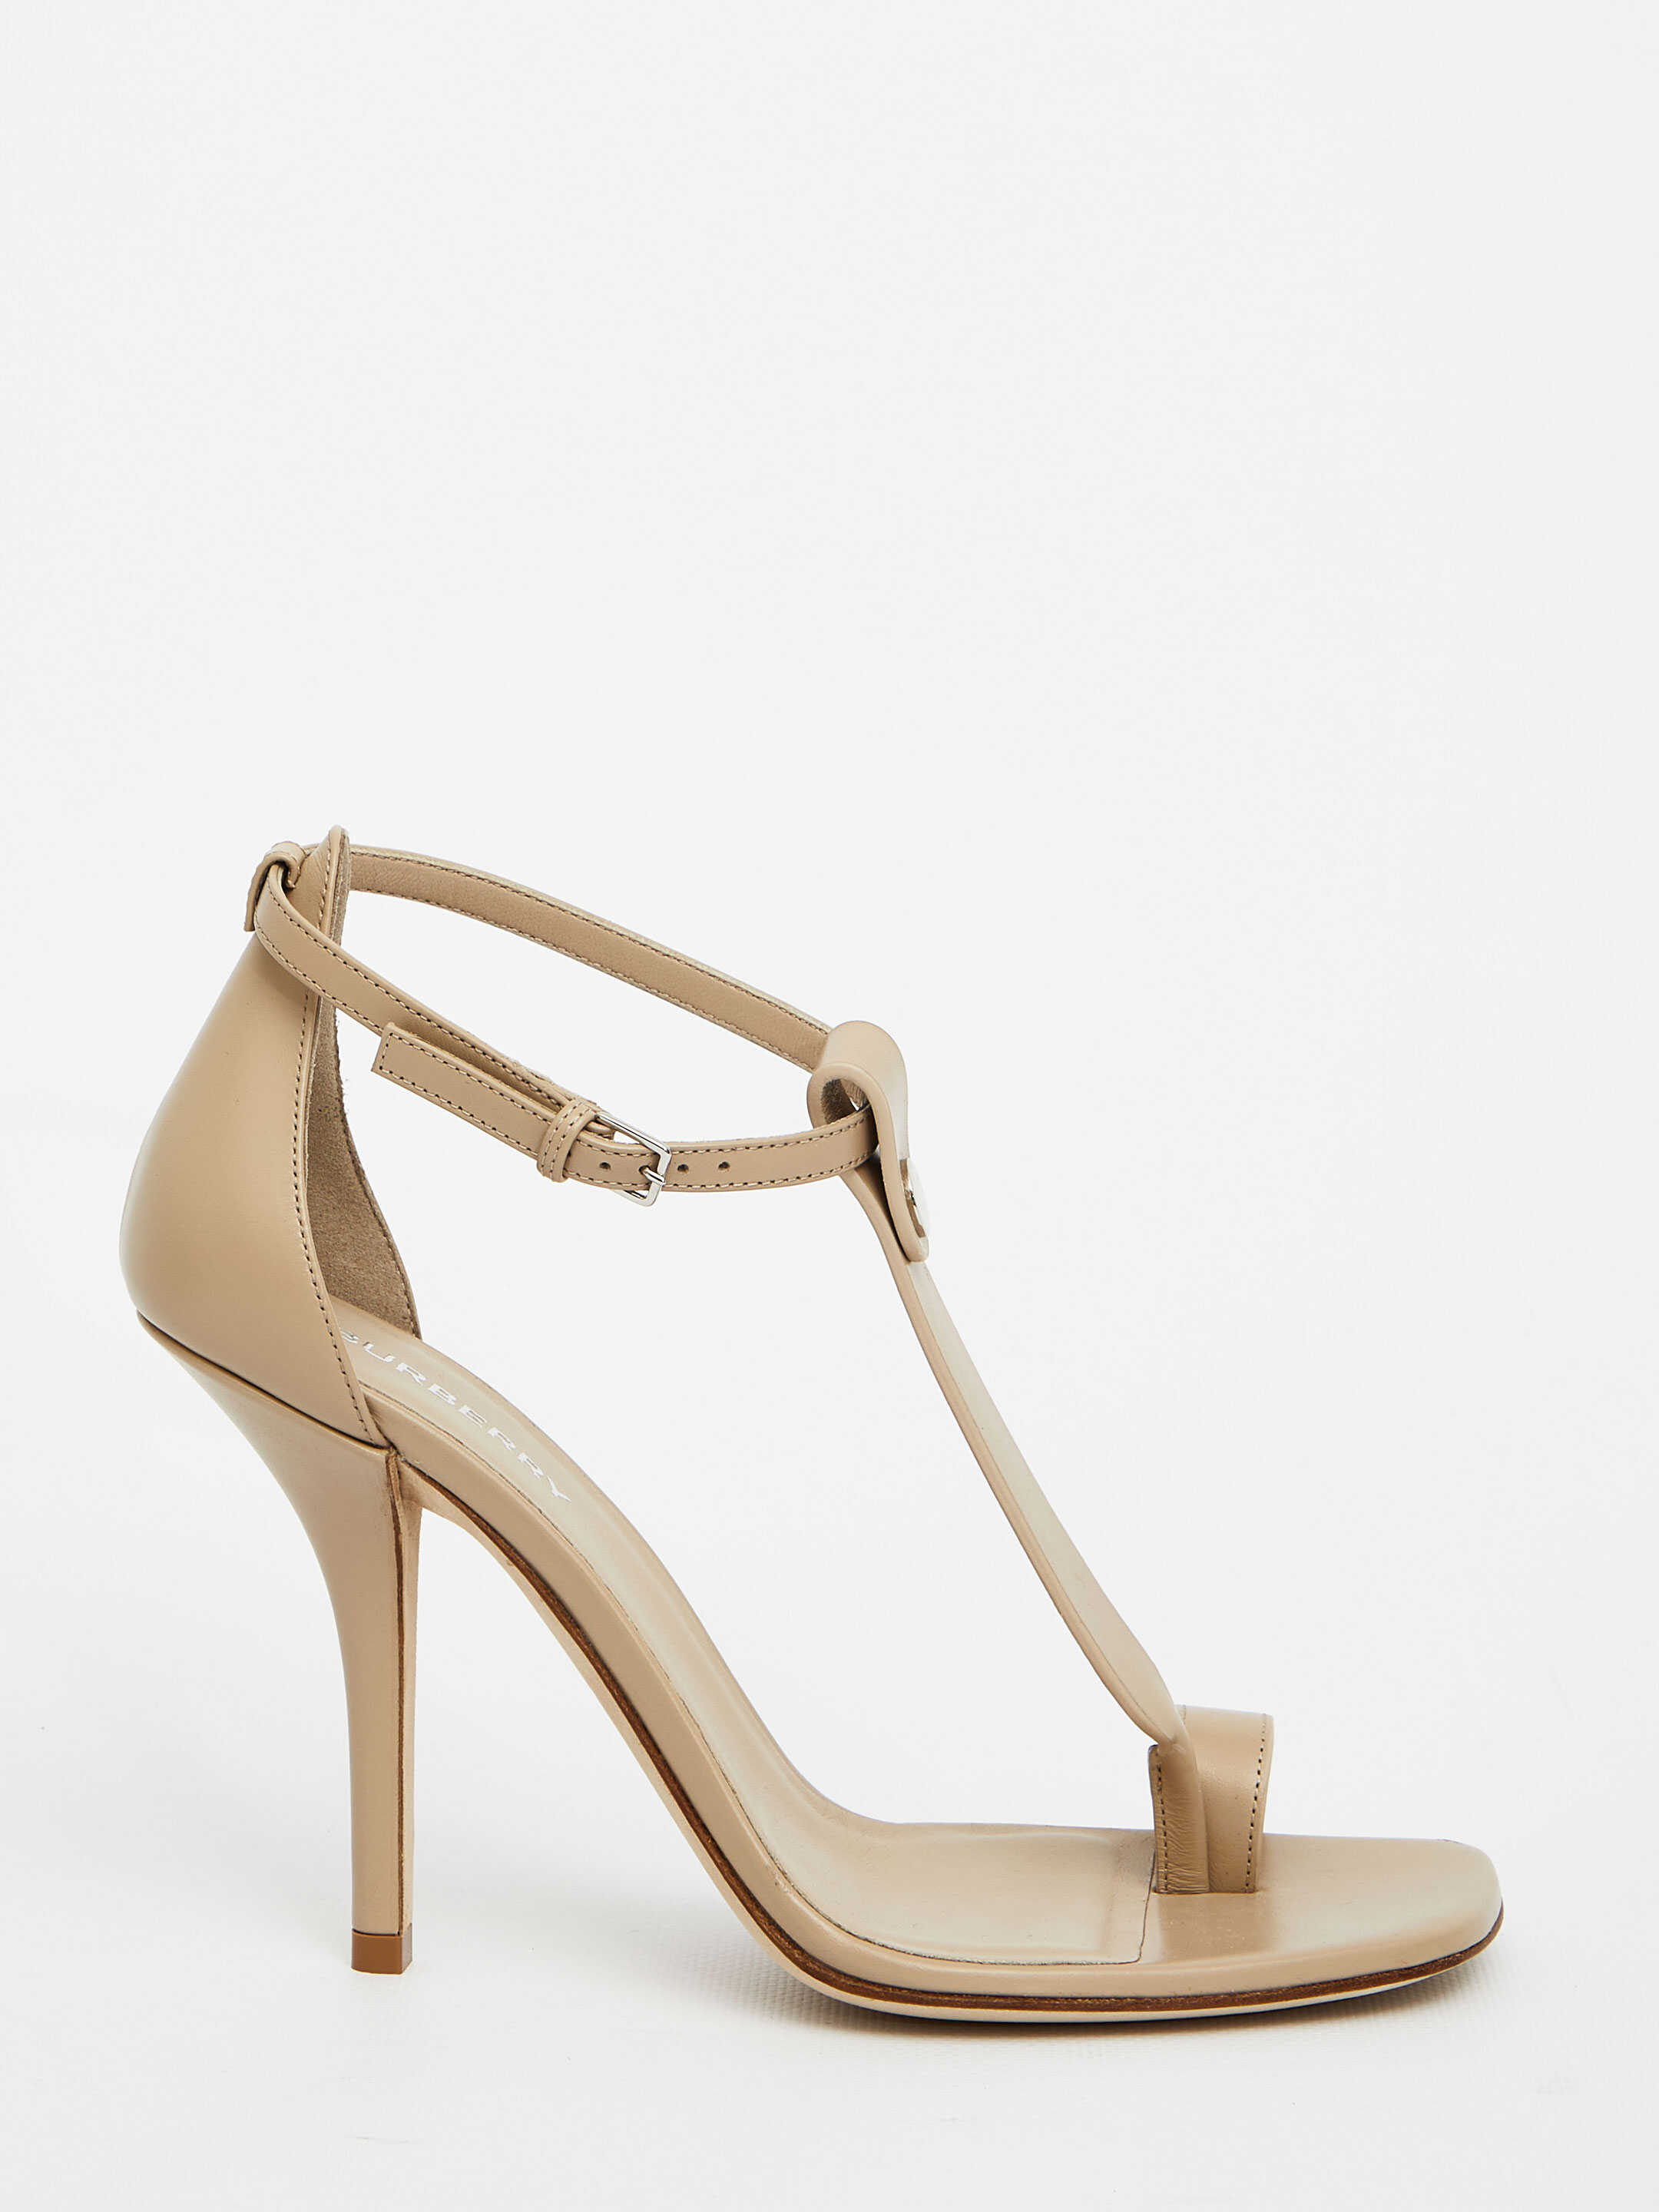 Burberry Leather Sandals Beige b-mall.ro